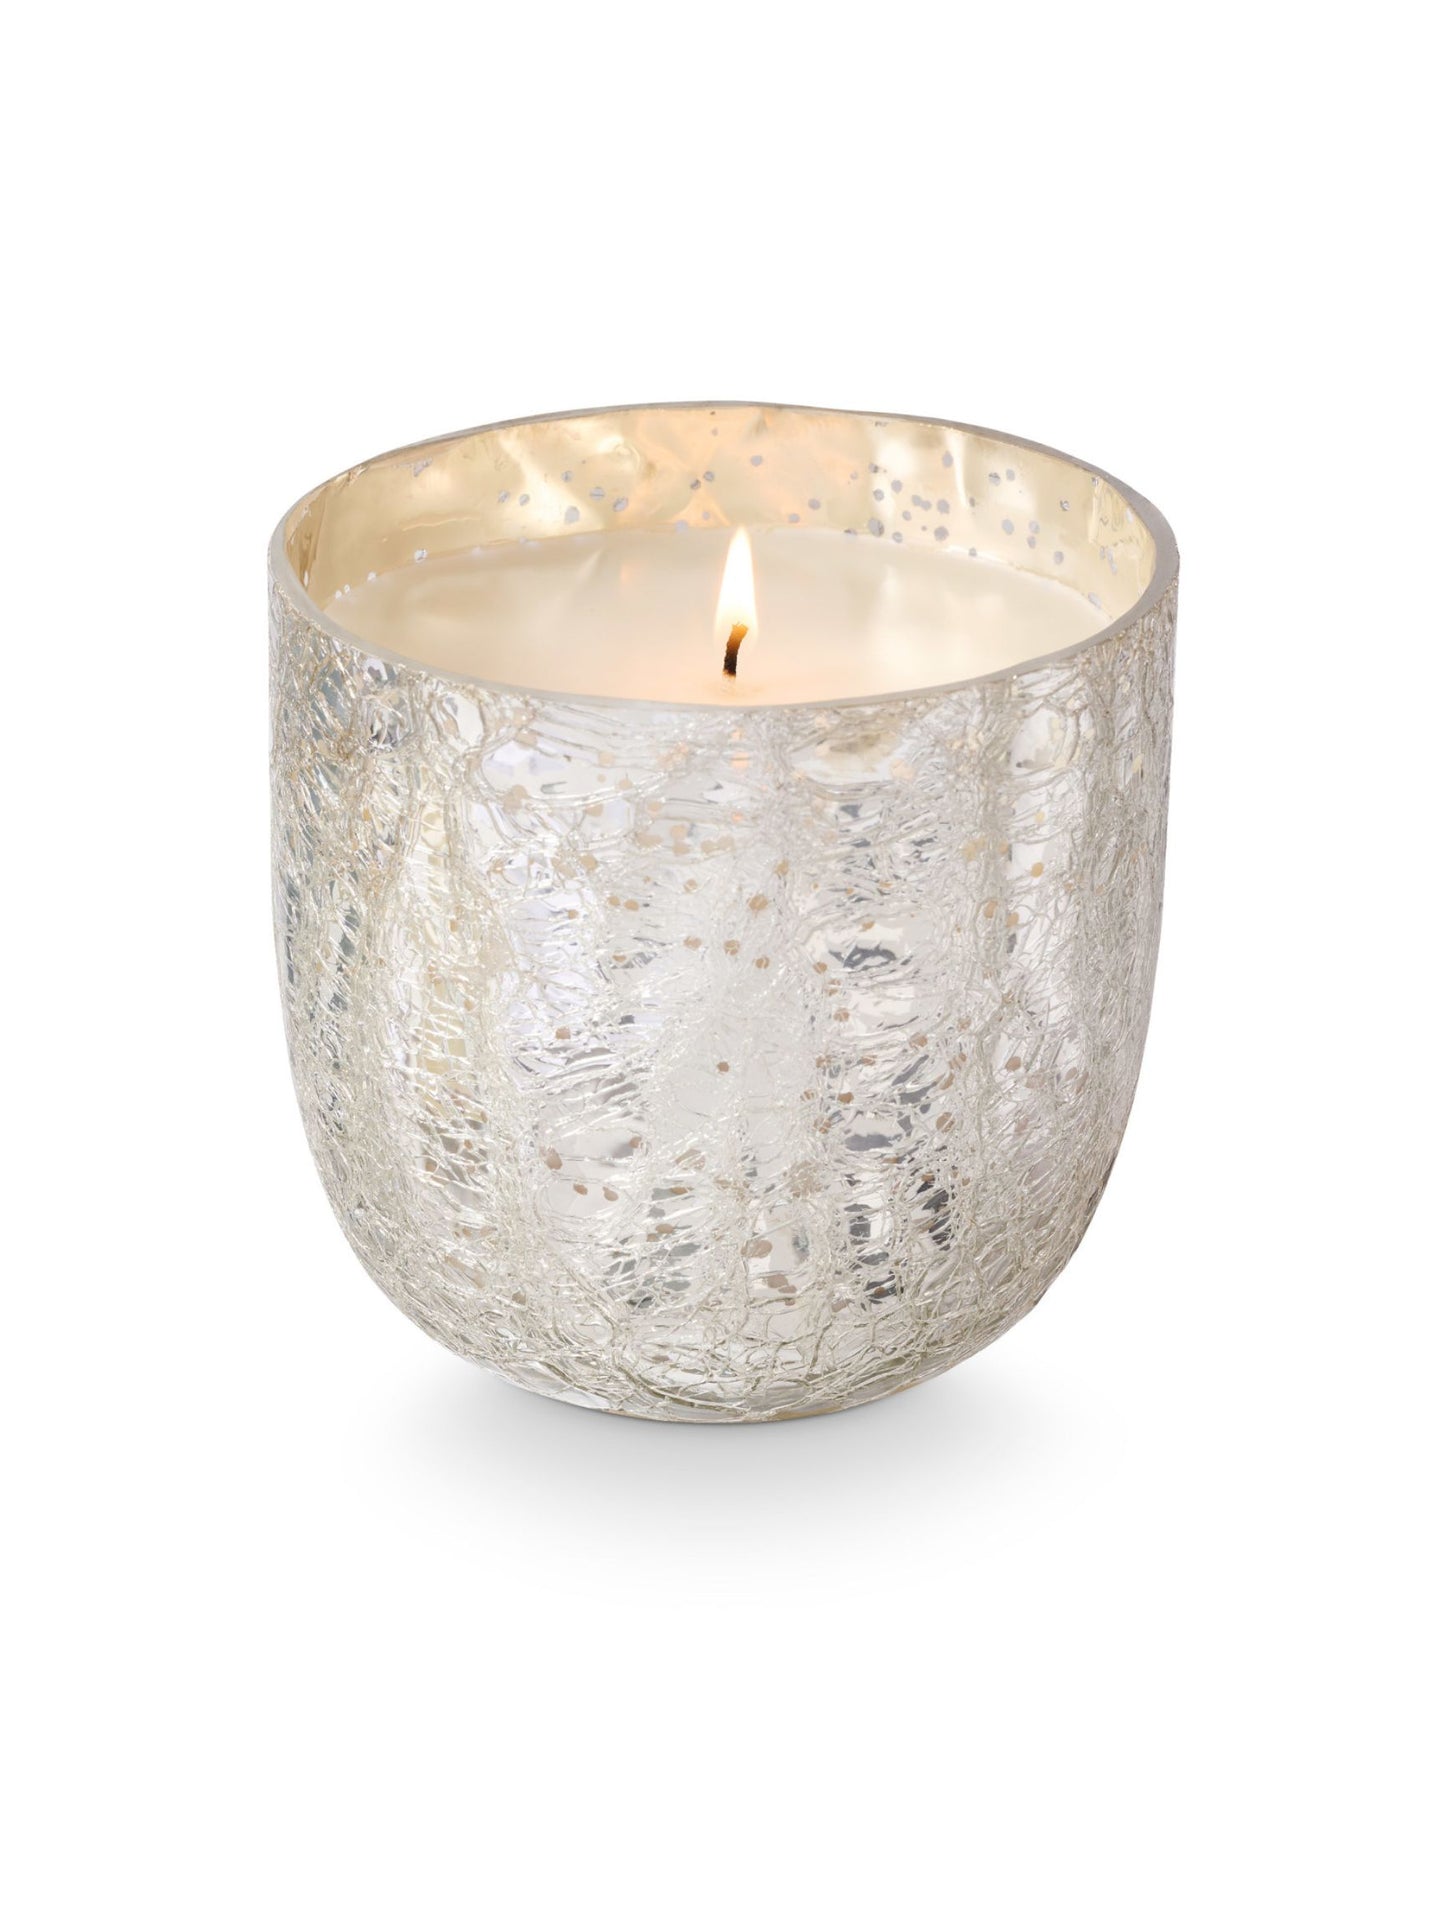 Balsam & Cedar Large Box Glass Candle (PICK UP ONLY)